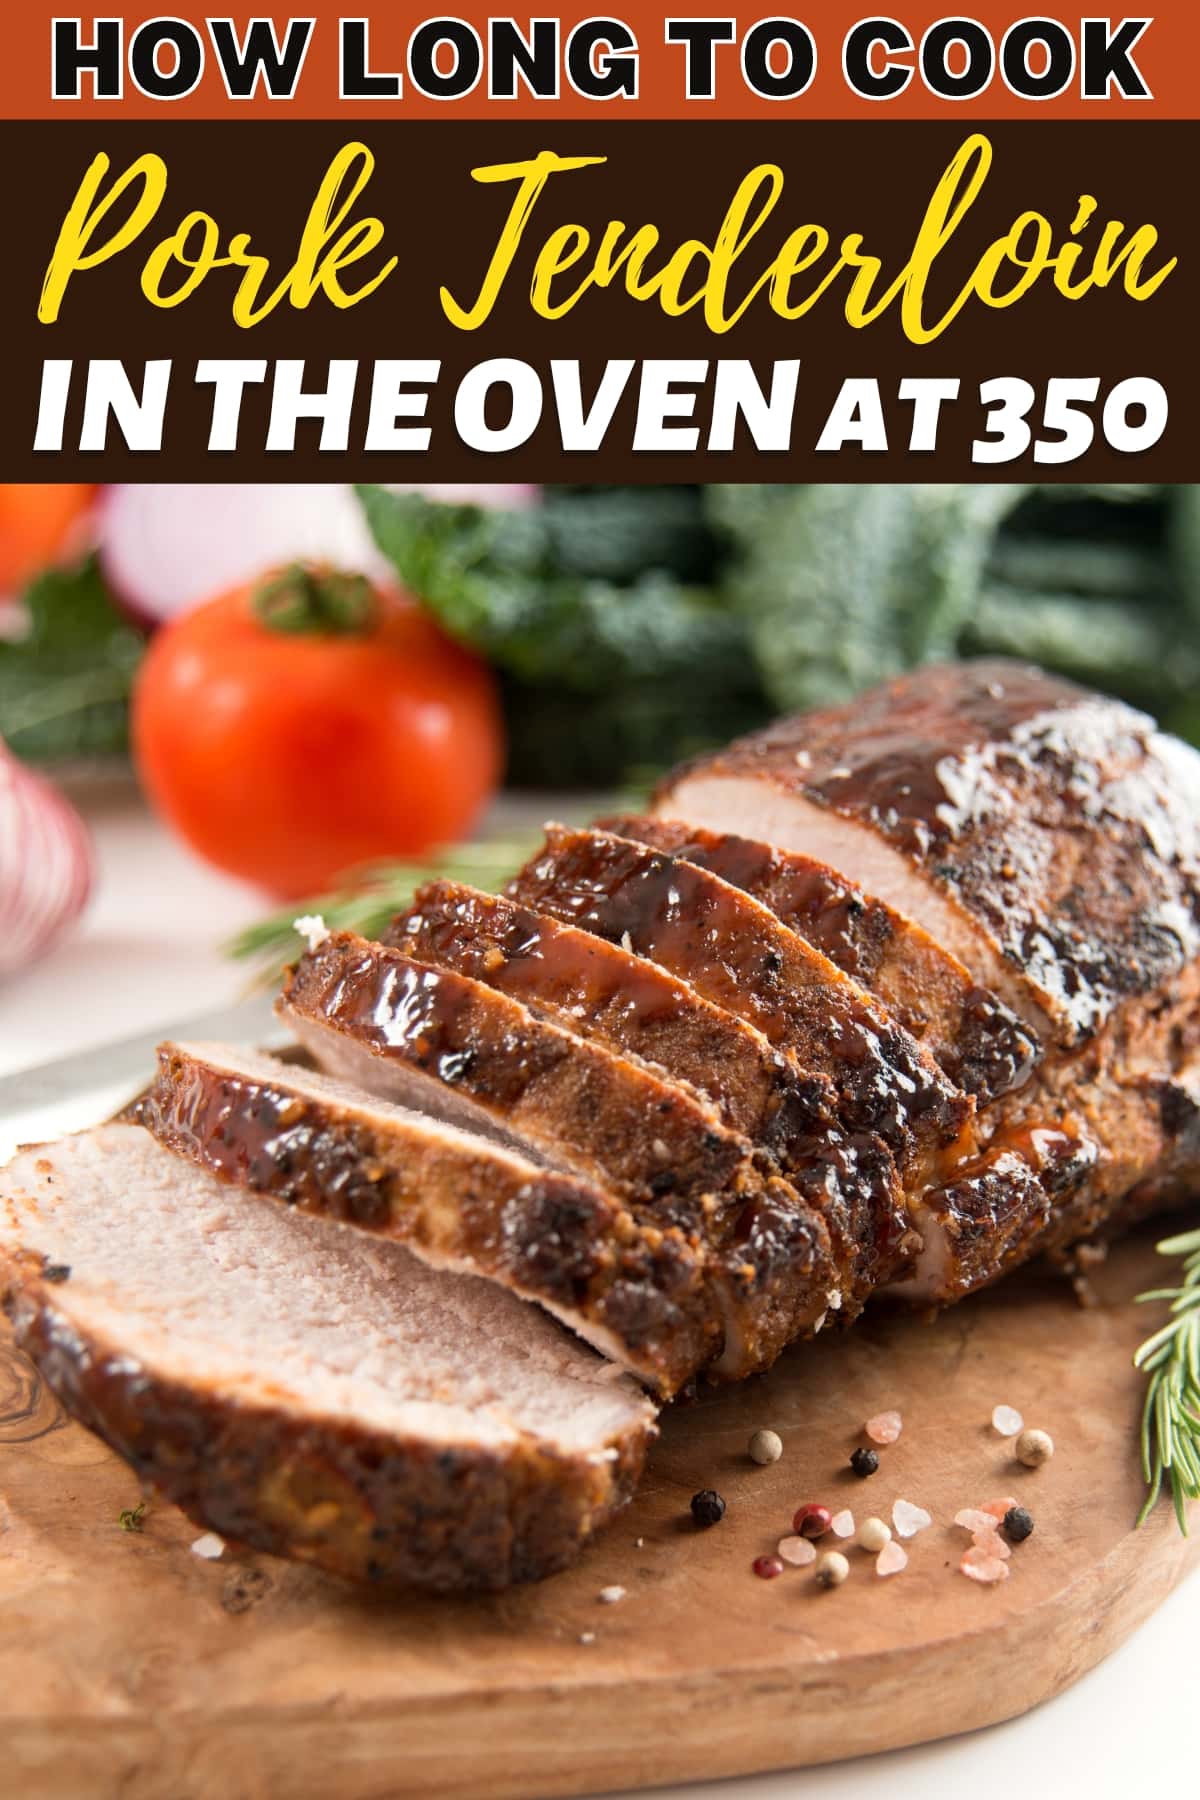 How Long to Cook Pork Tenderloin in the Oven at 350